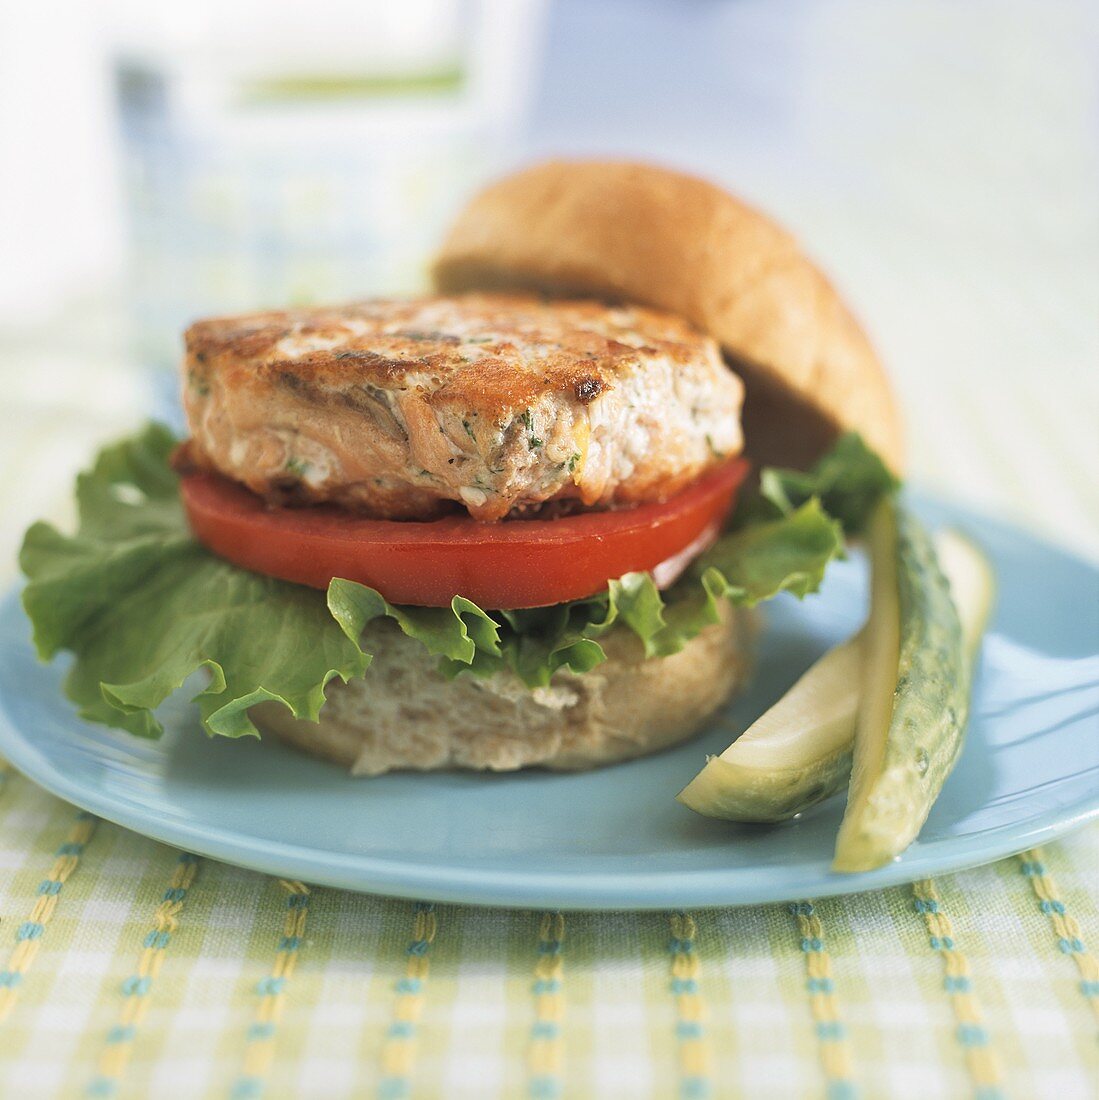 A Fried Salmon Cake on a Roll with Tomato and Lettuce